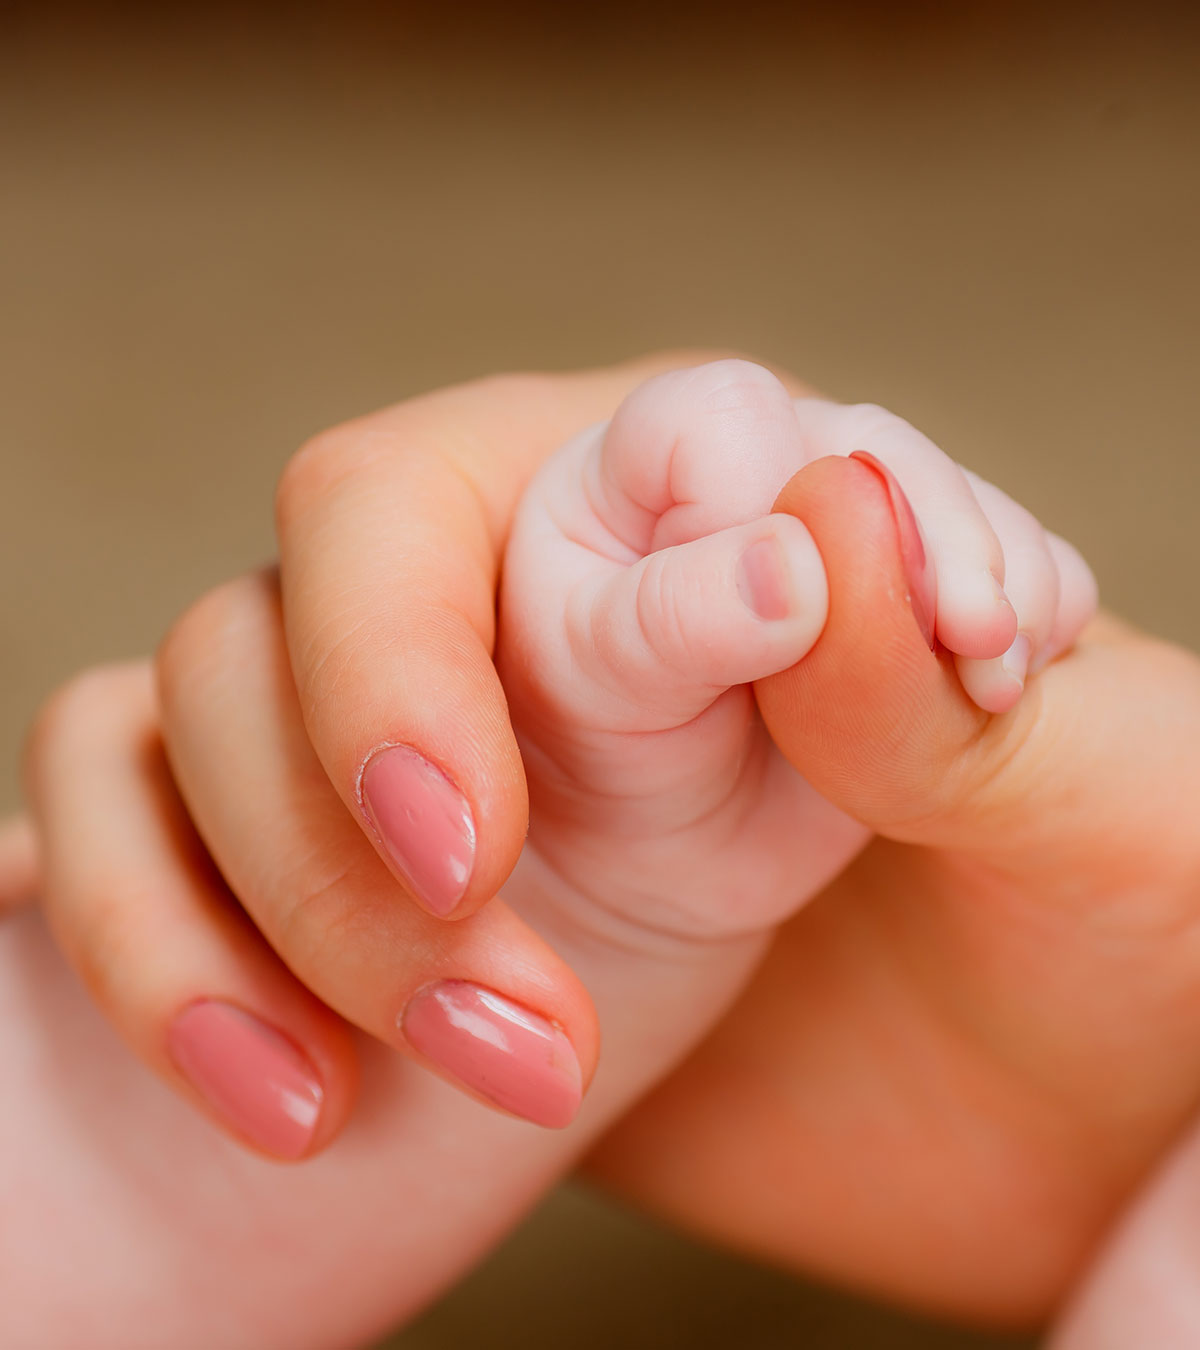 Baby Adoption Procedure, Stages And Rules In India